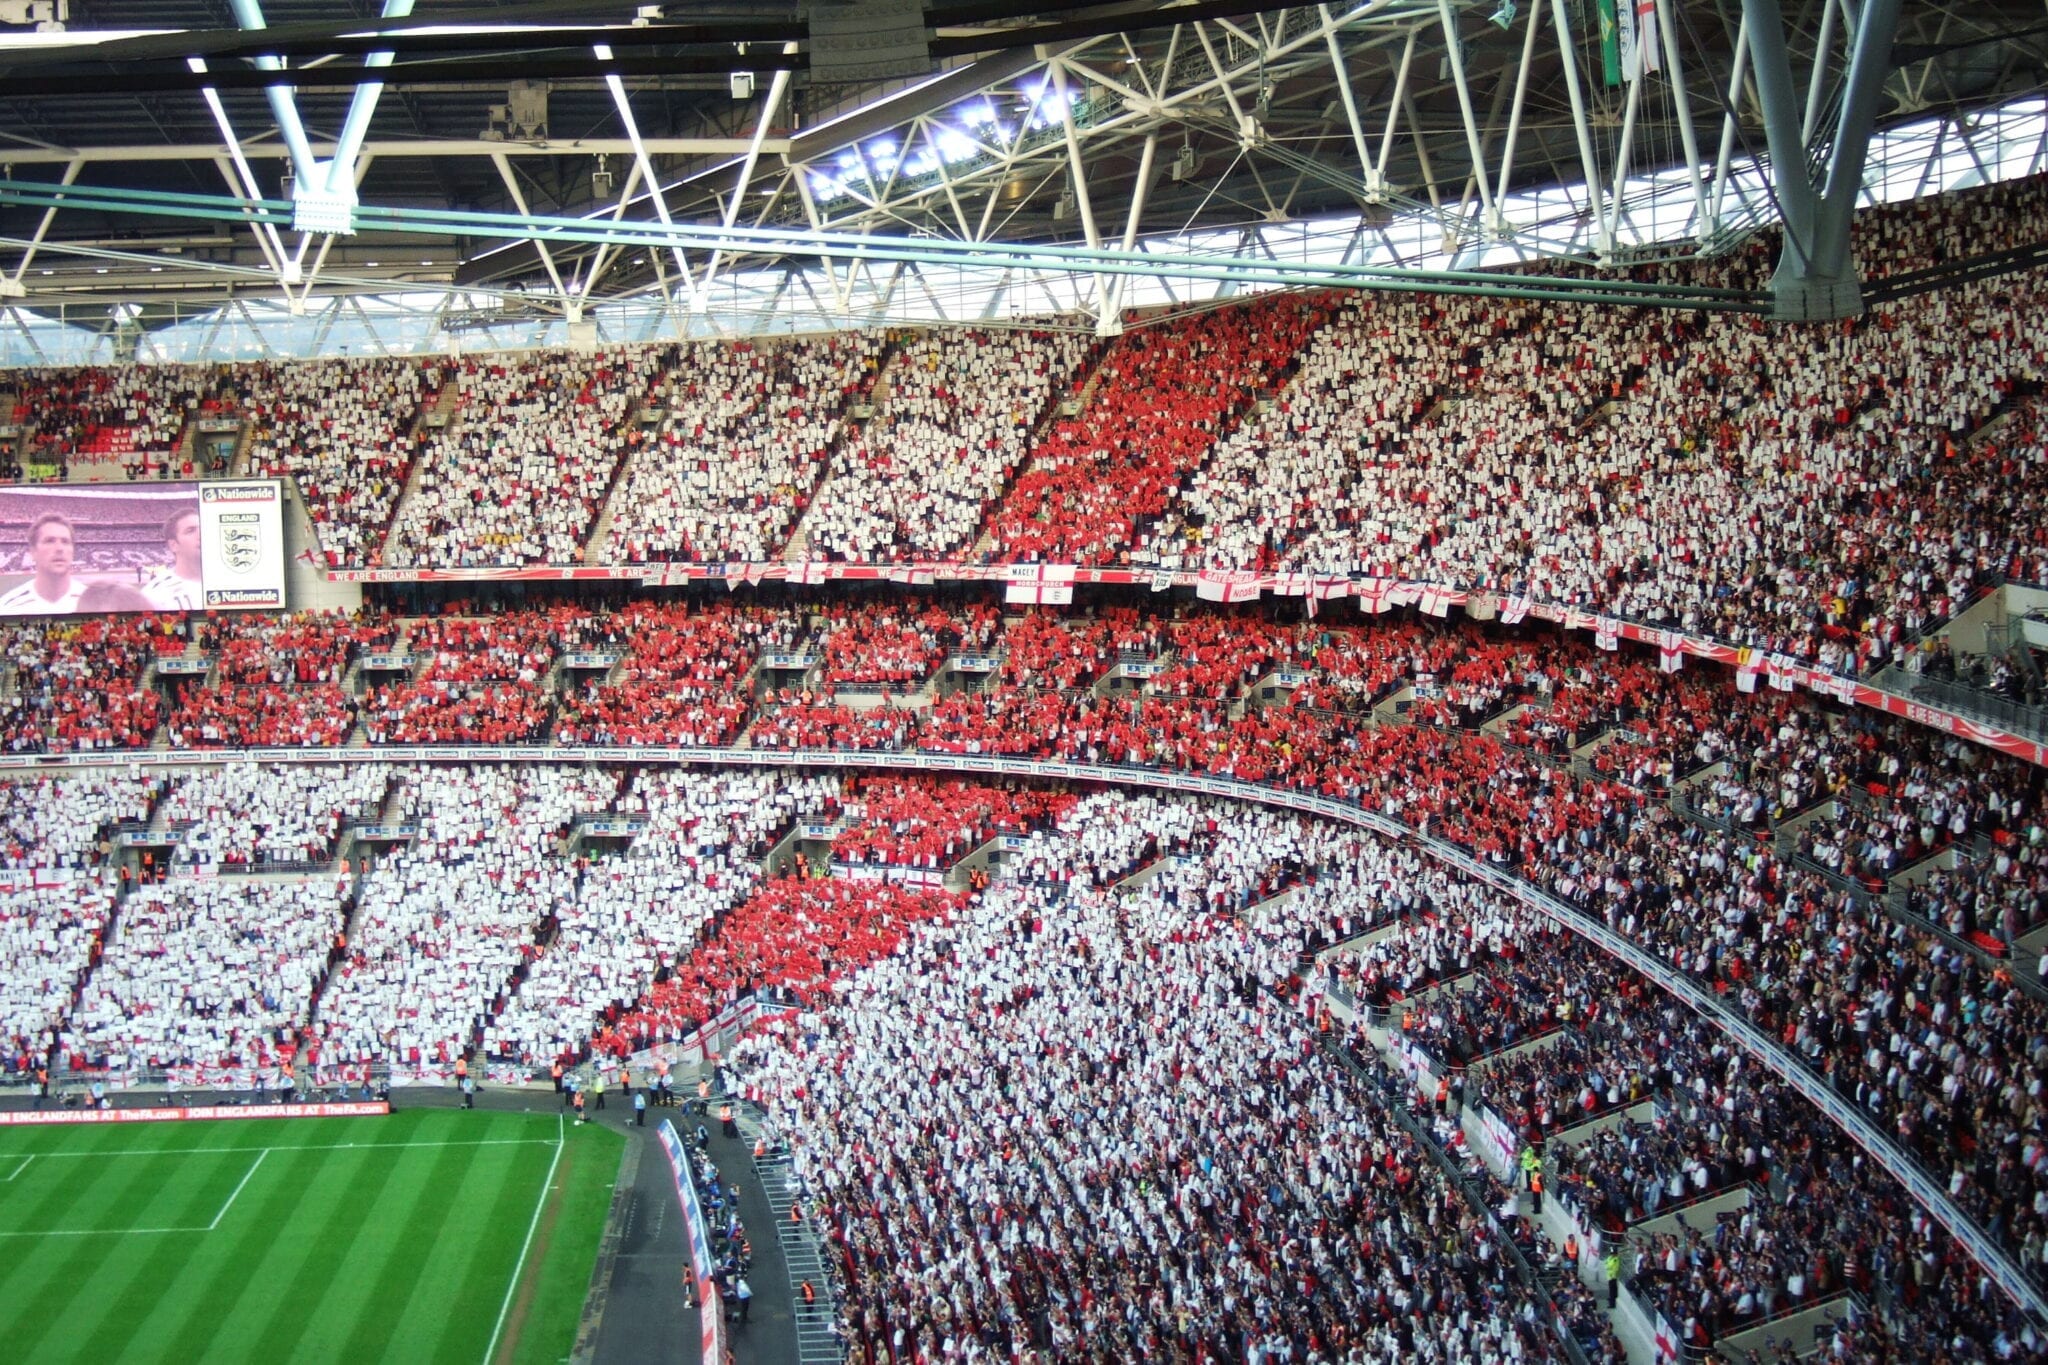 The crowd at an England football match